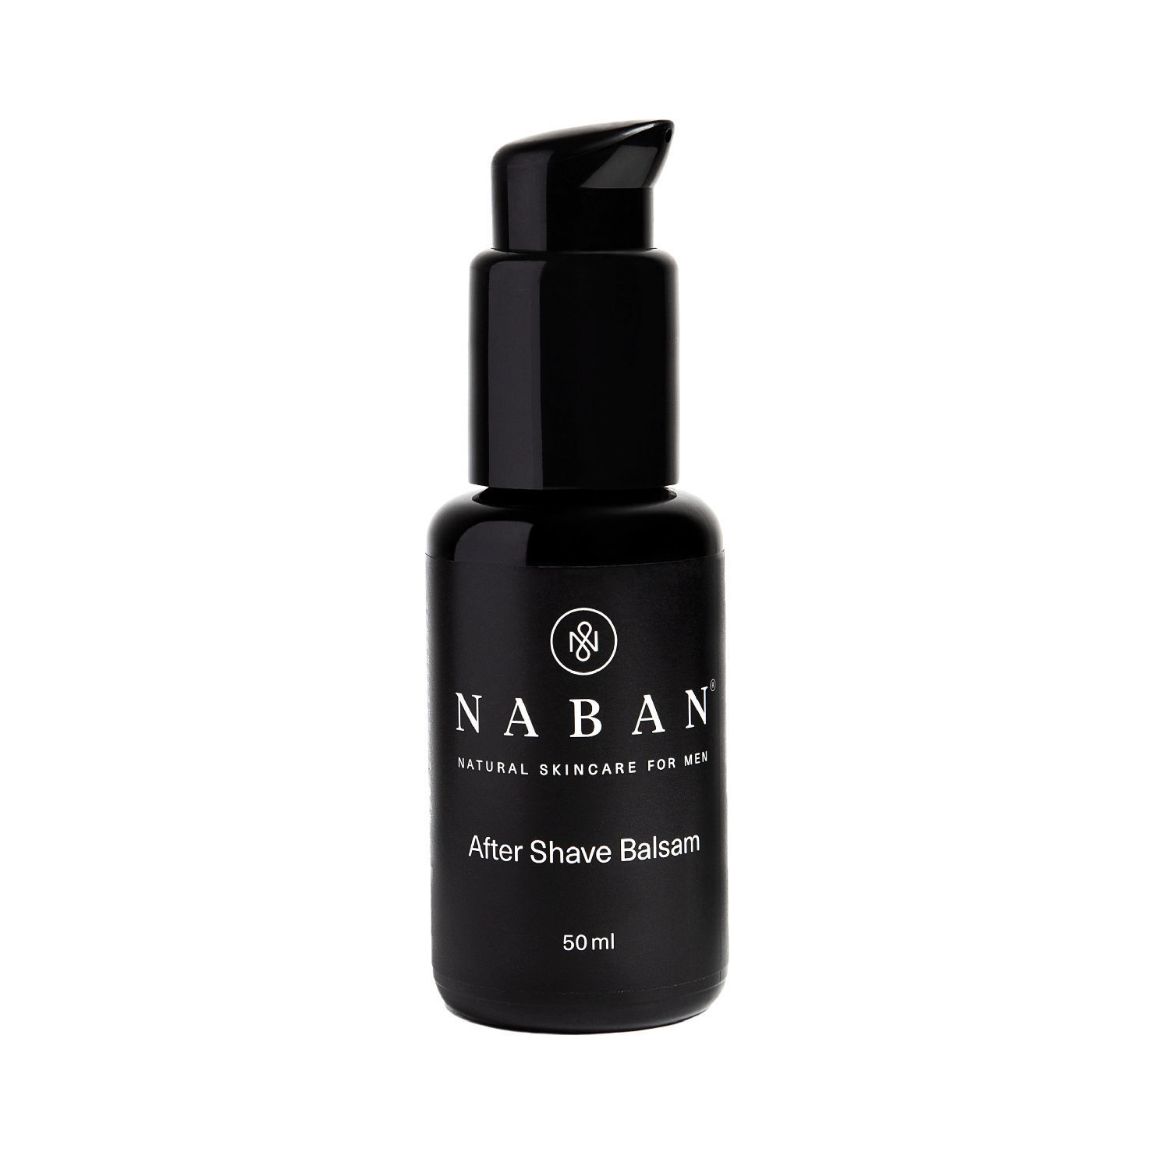 Image of NABAN After Shave Balm (50ml)